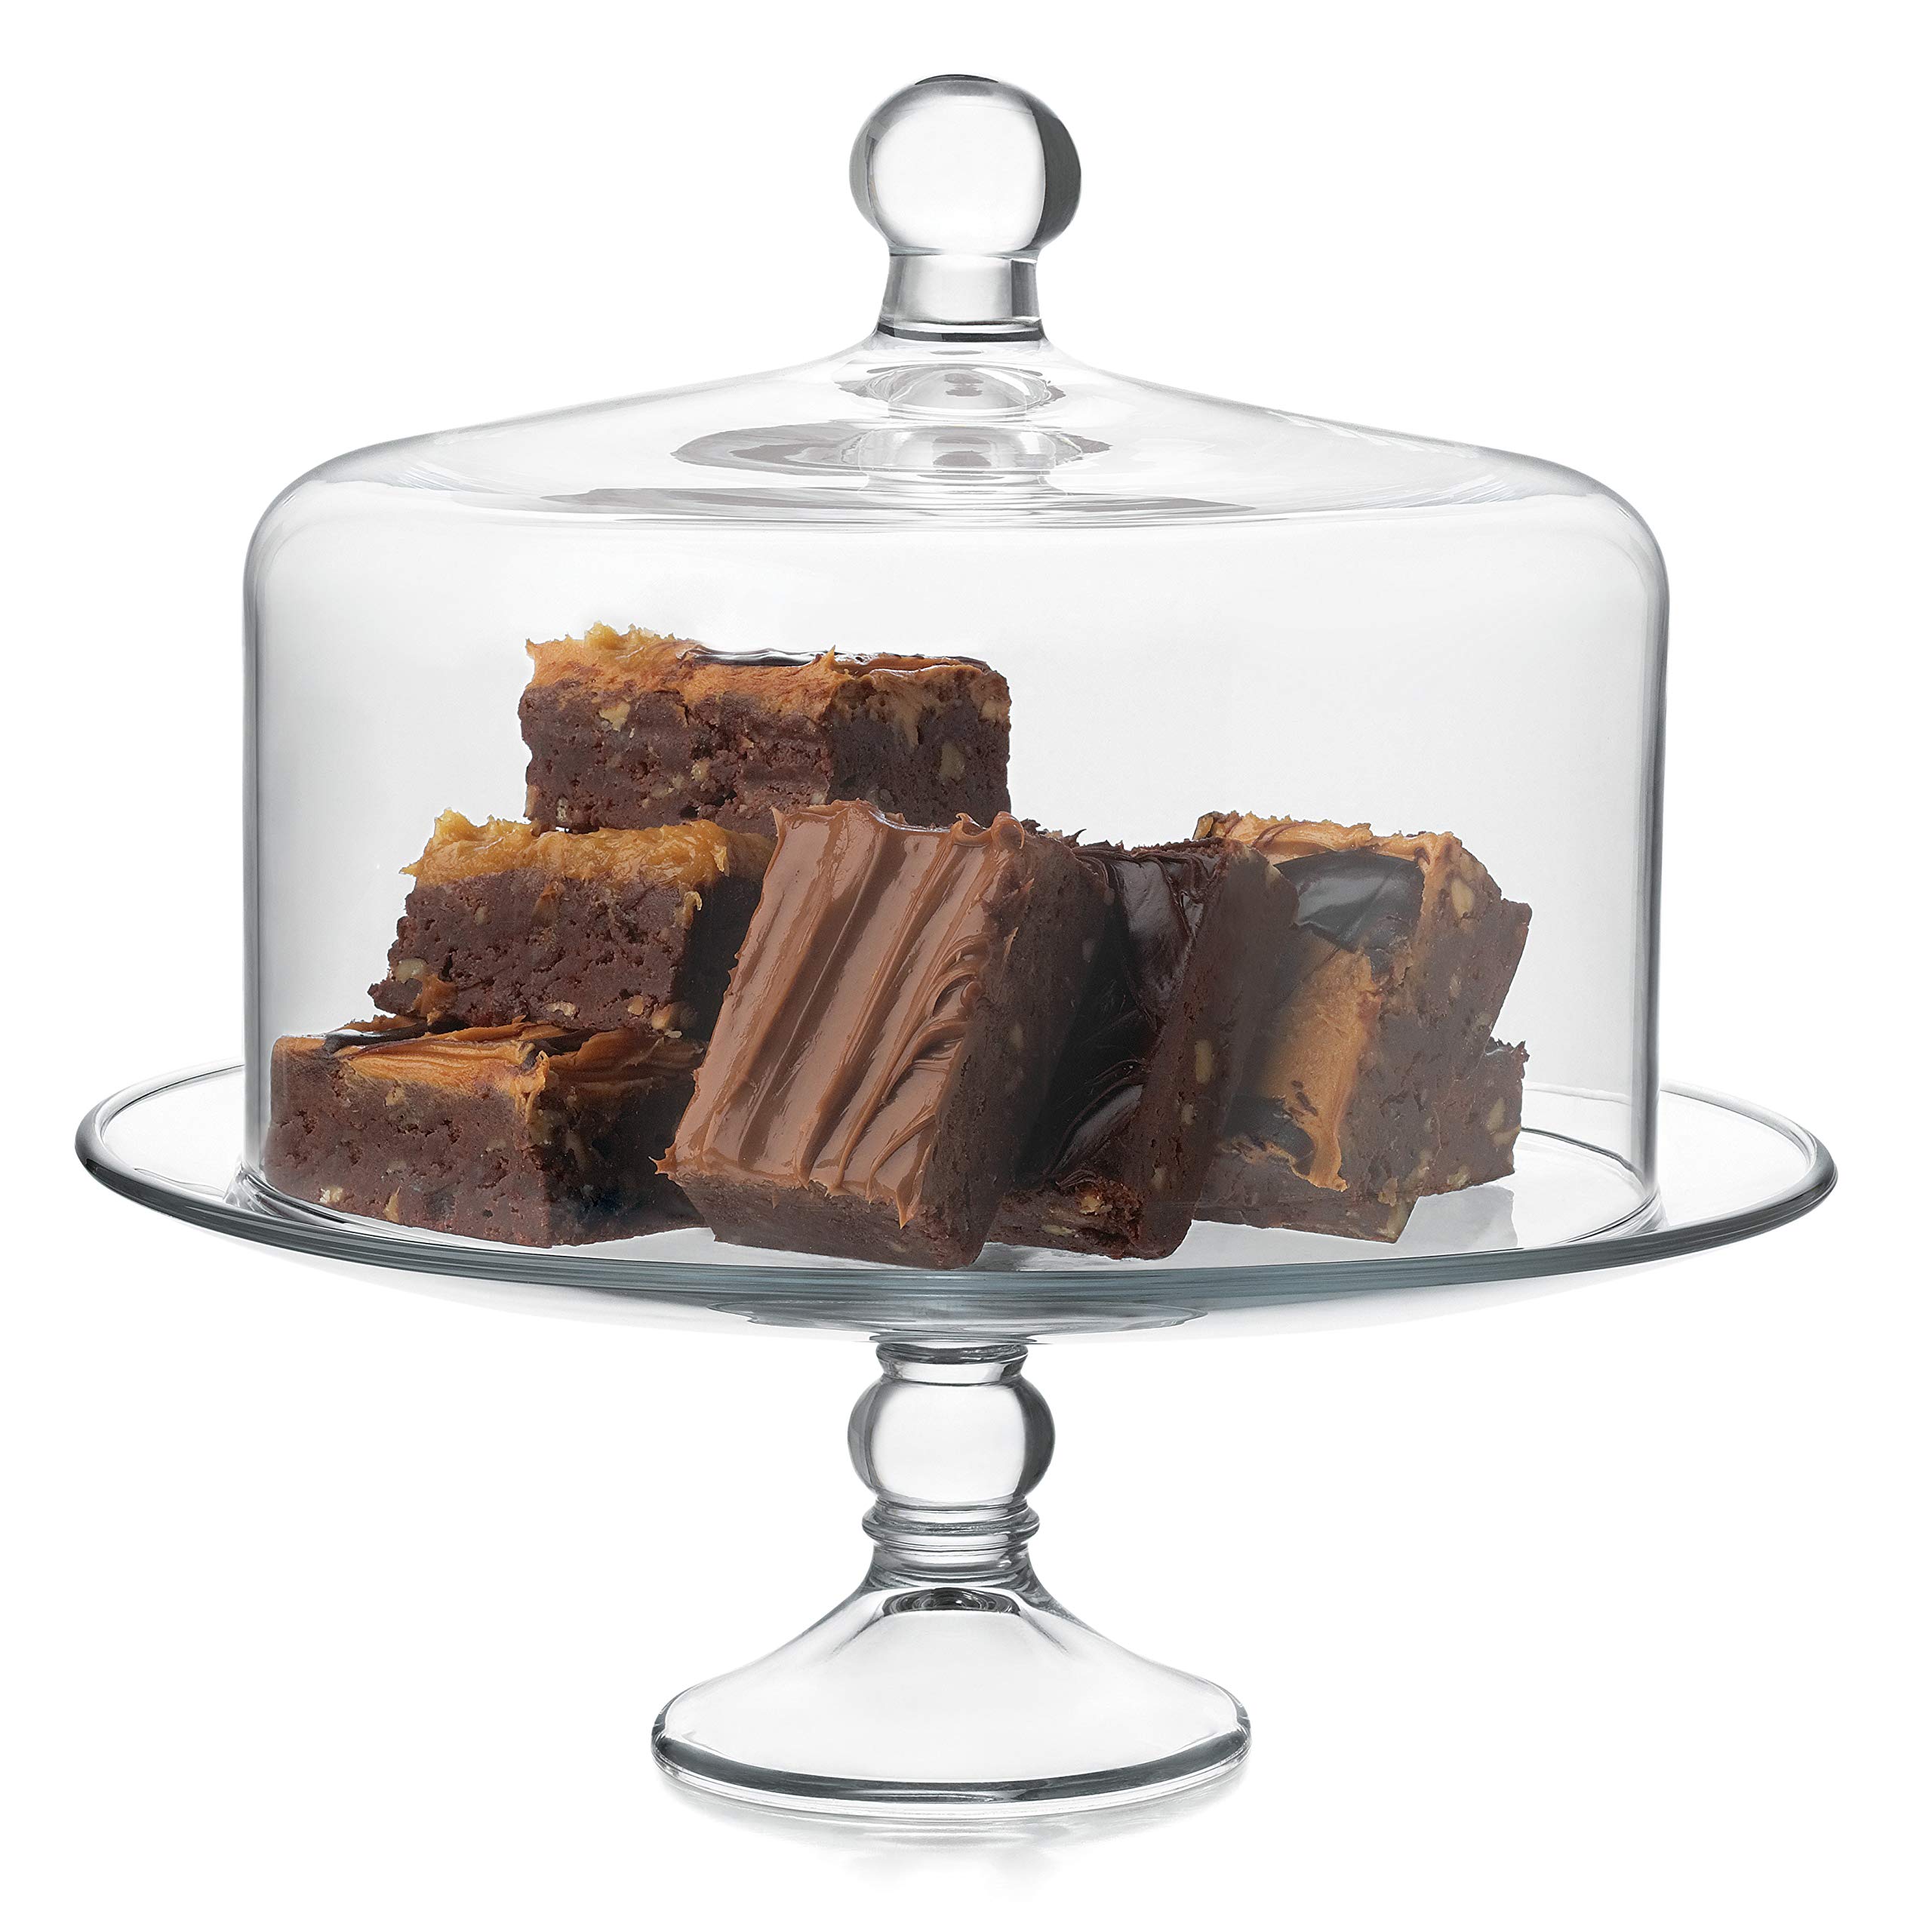 Libbey Selene Glass Cake Stand with Dome